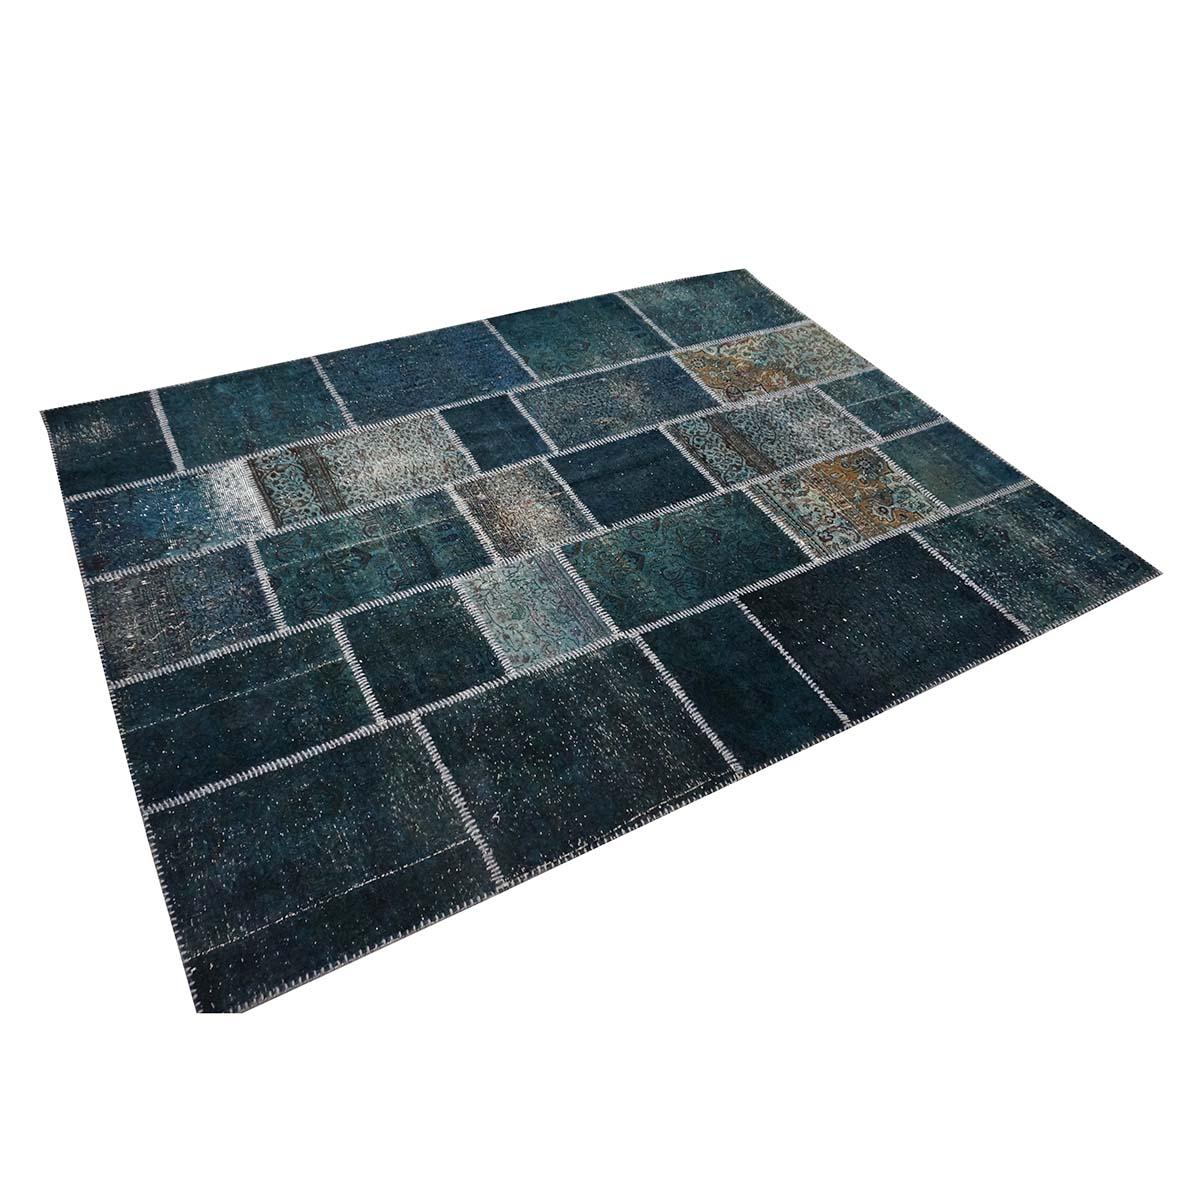 Vintage Turkish Modern Patchwork 6x8 Blue Distressed Handmade Area Rug In Good Condition For Sale In Houston, TX